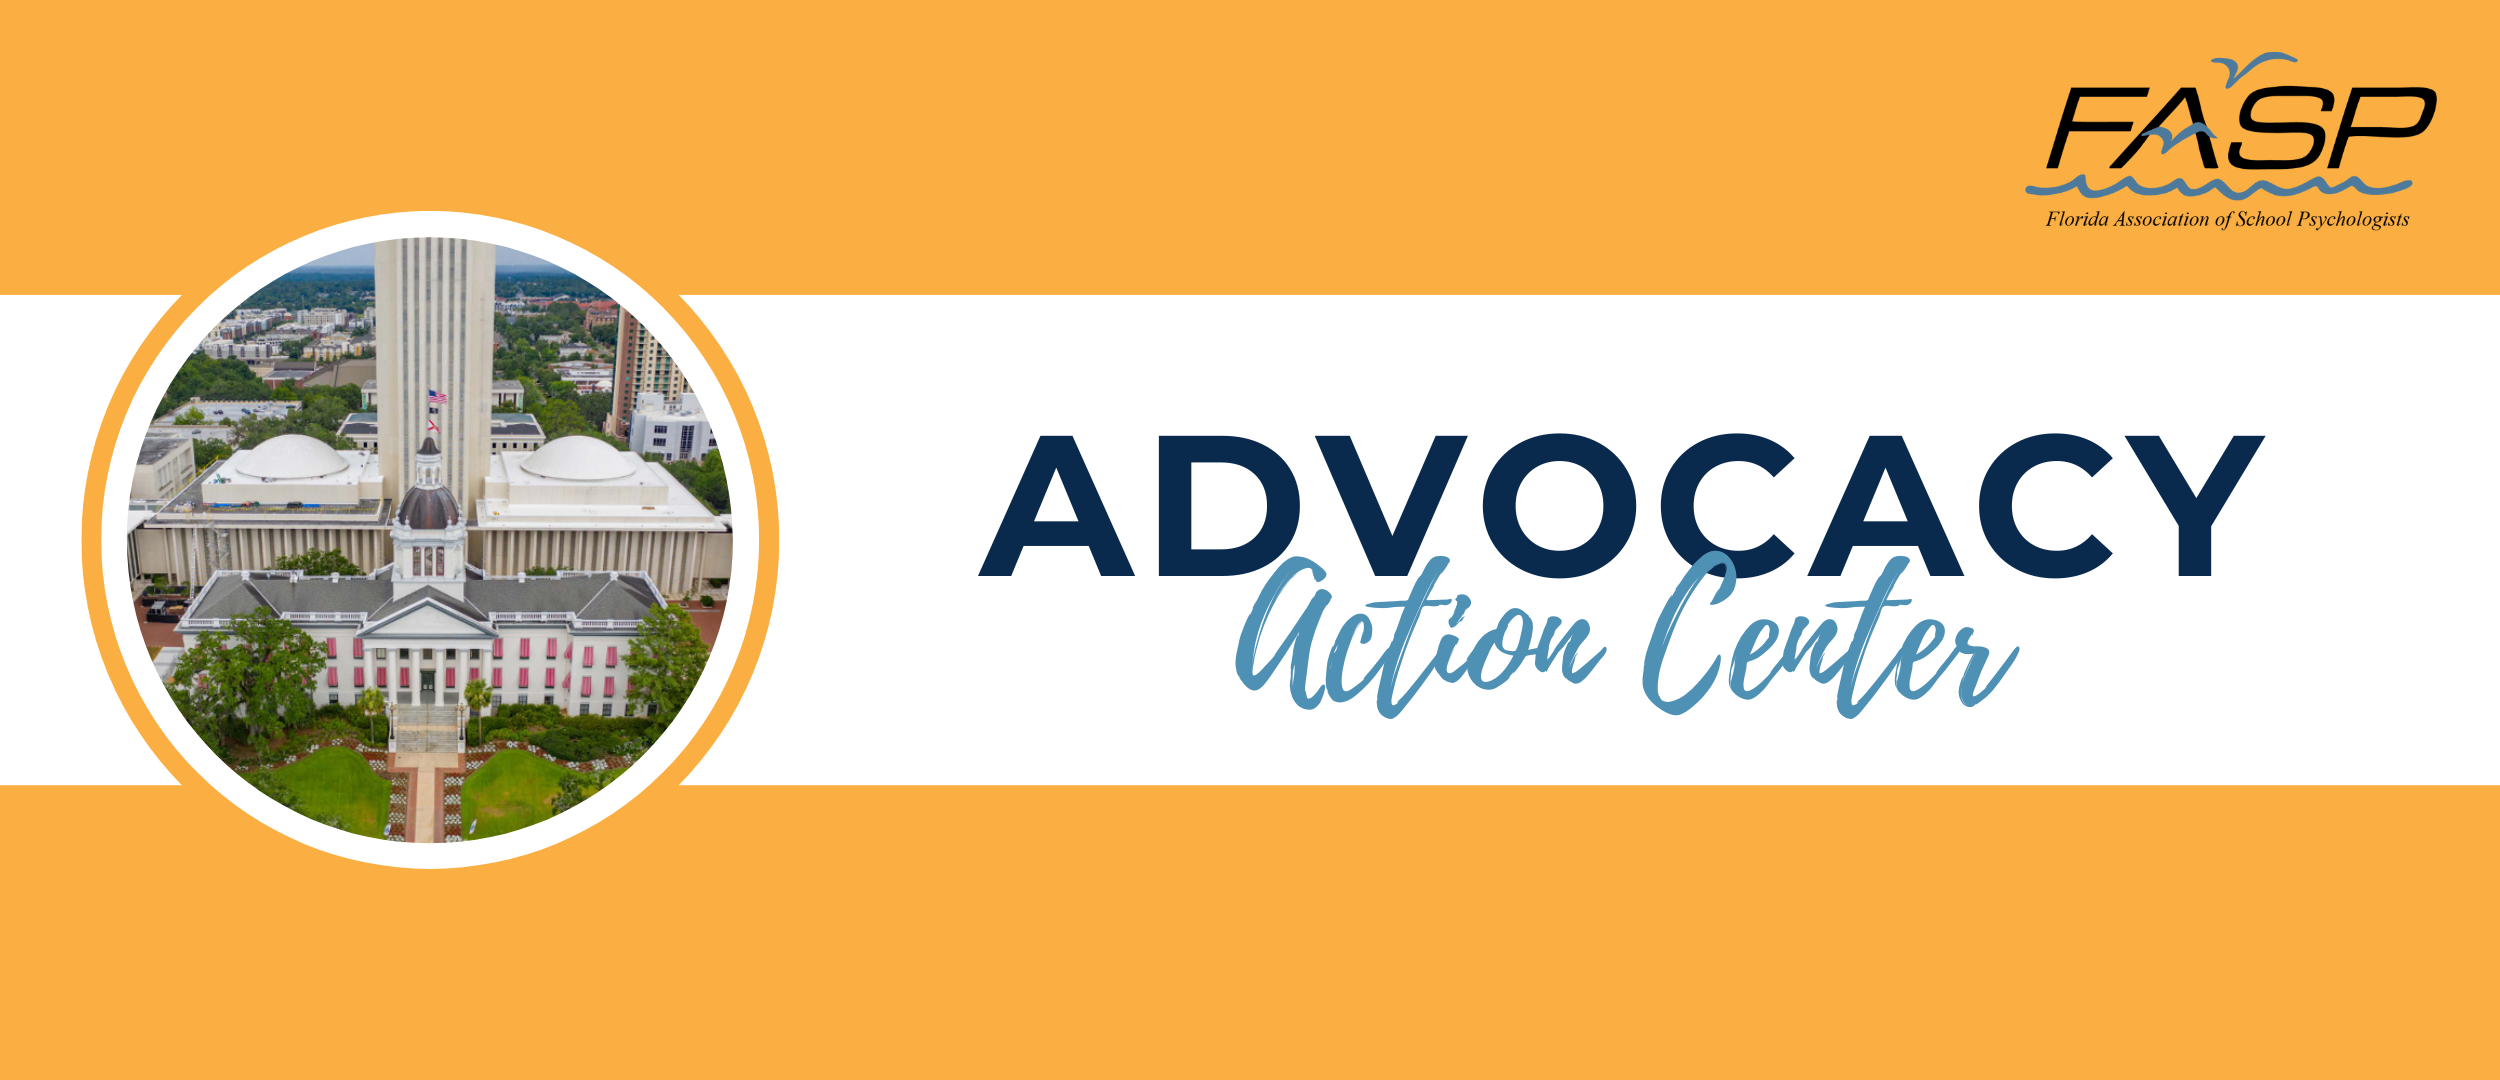 Advocacy Action Center Banner